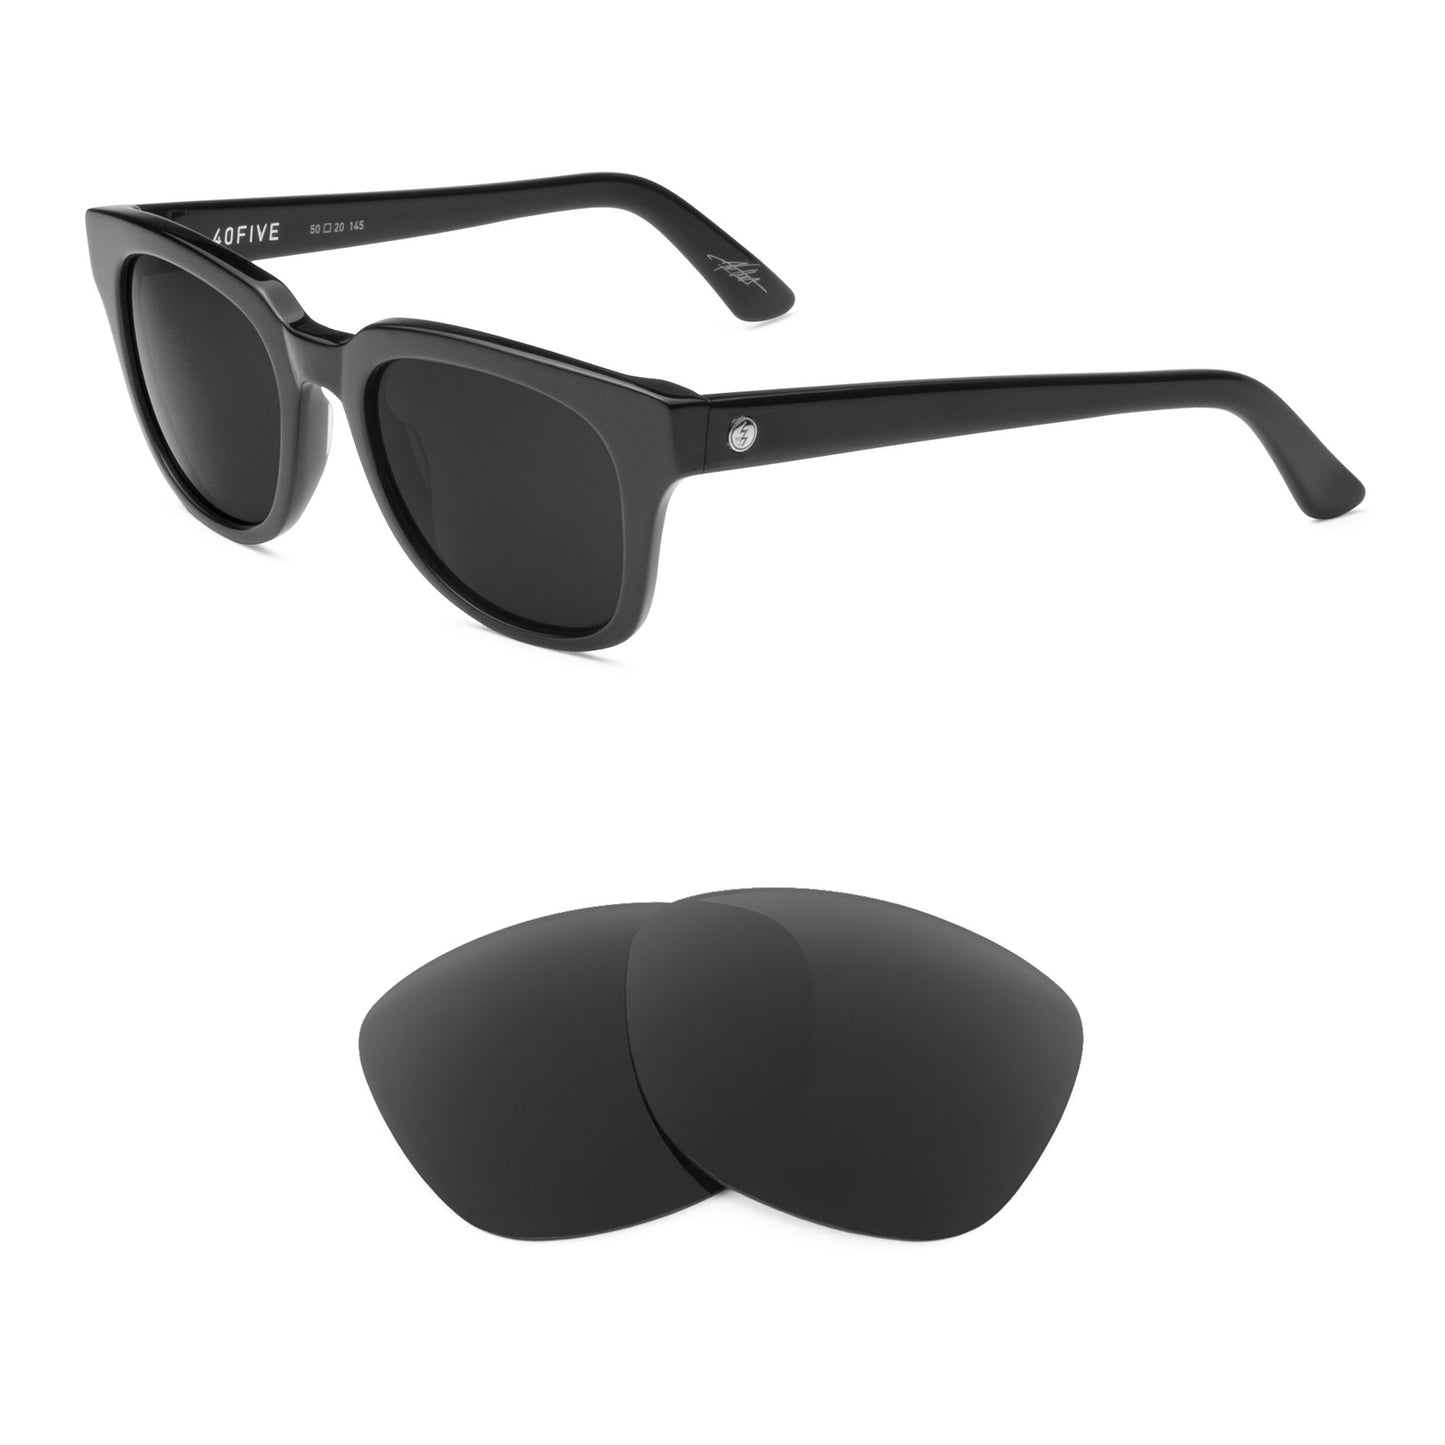 Electric 40 Five sunglasses with replacement lenses